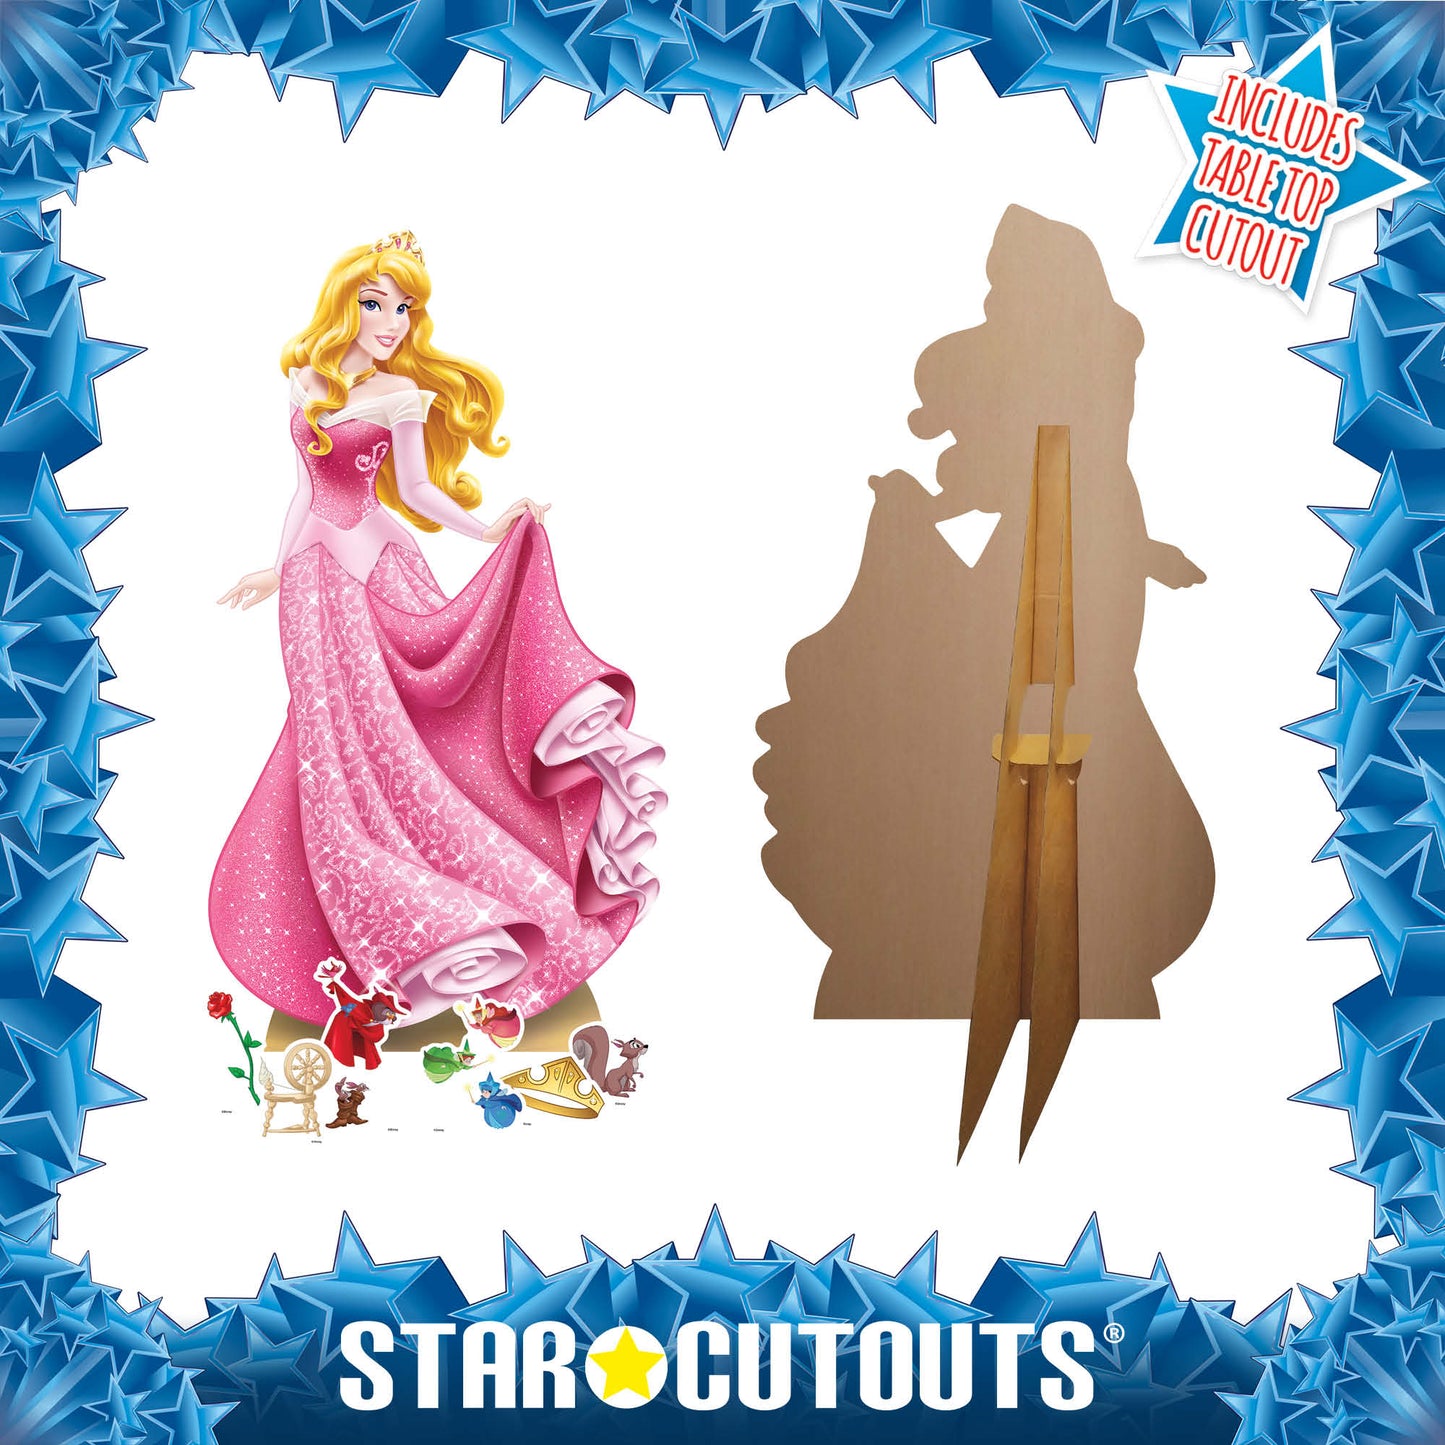 Aurora Sleeping Beauty Cardboard Cutout Party Decorations With Six Mini Party Decorations